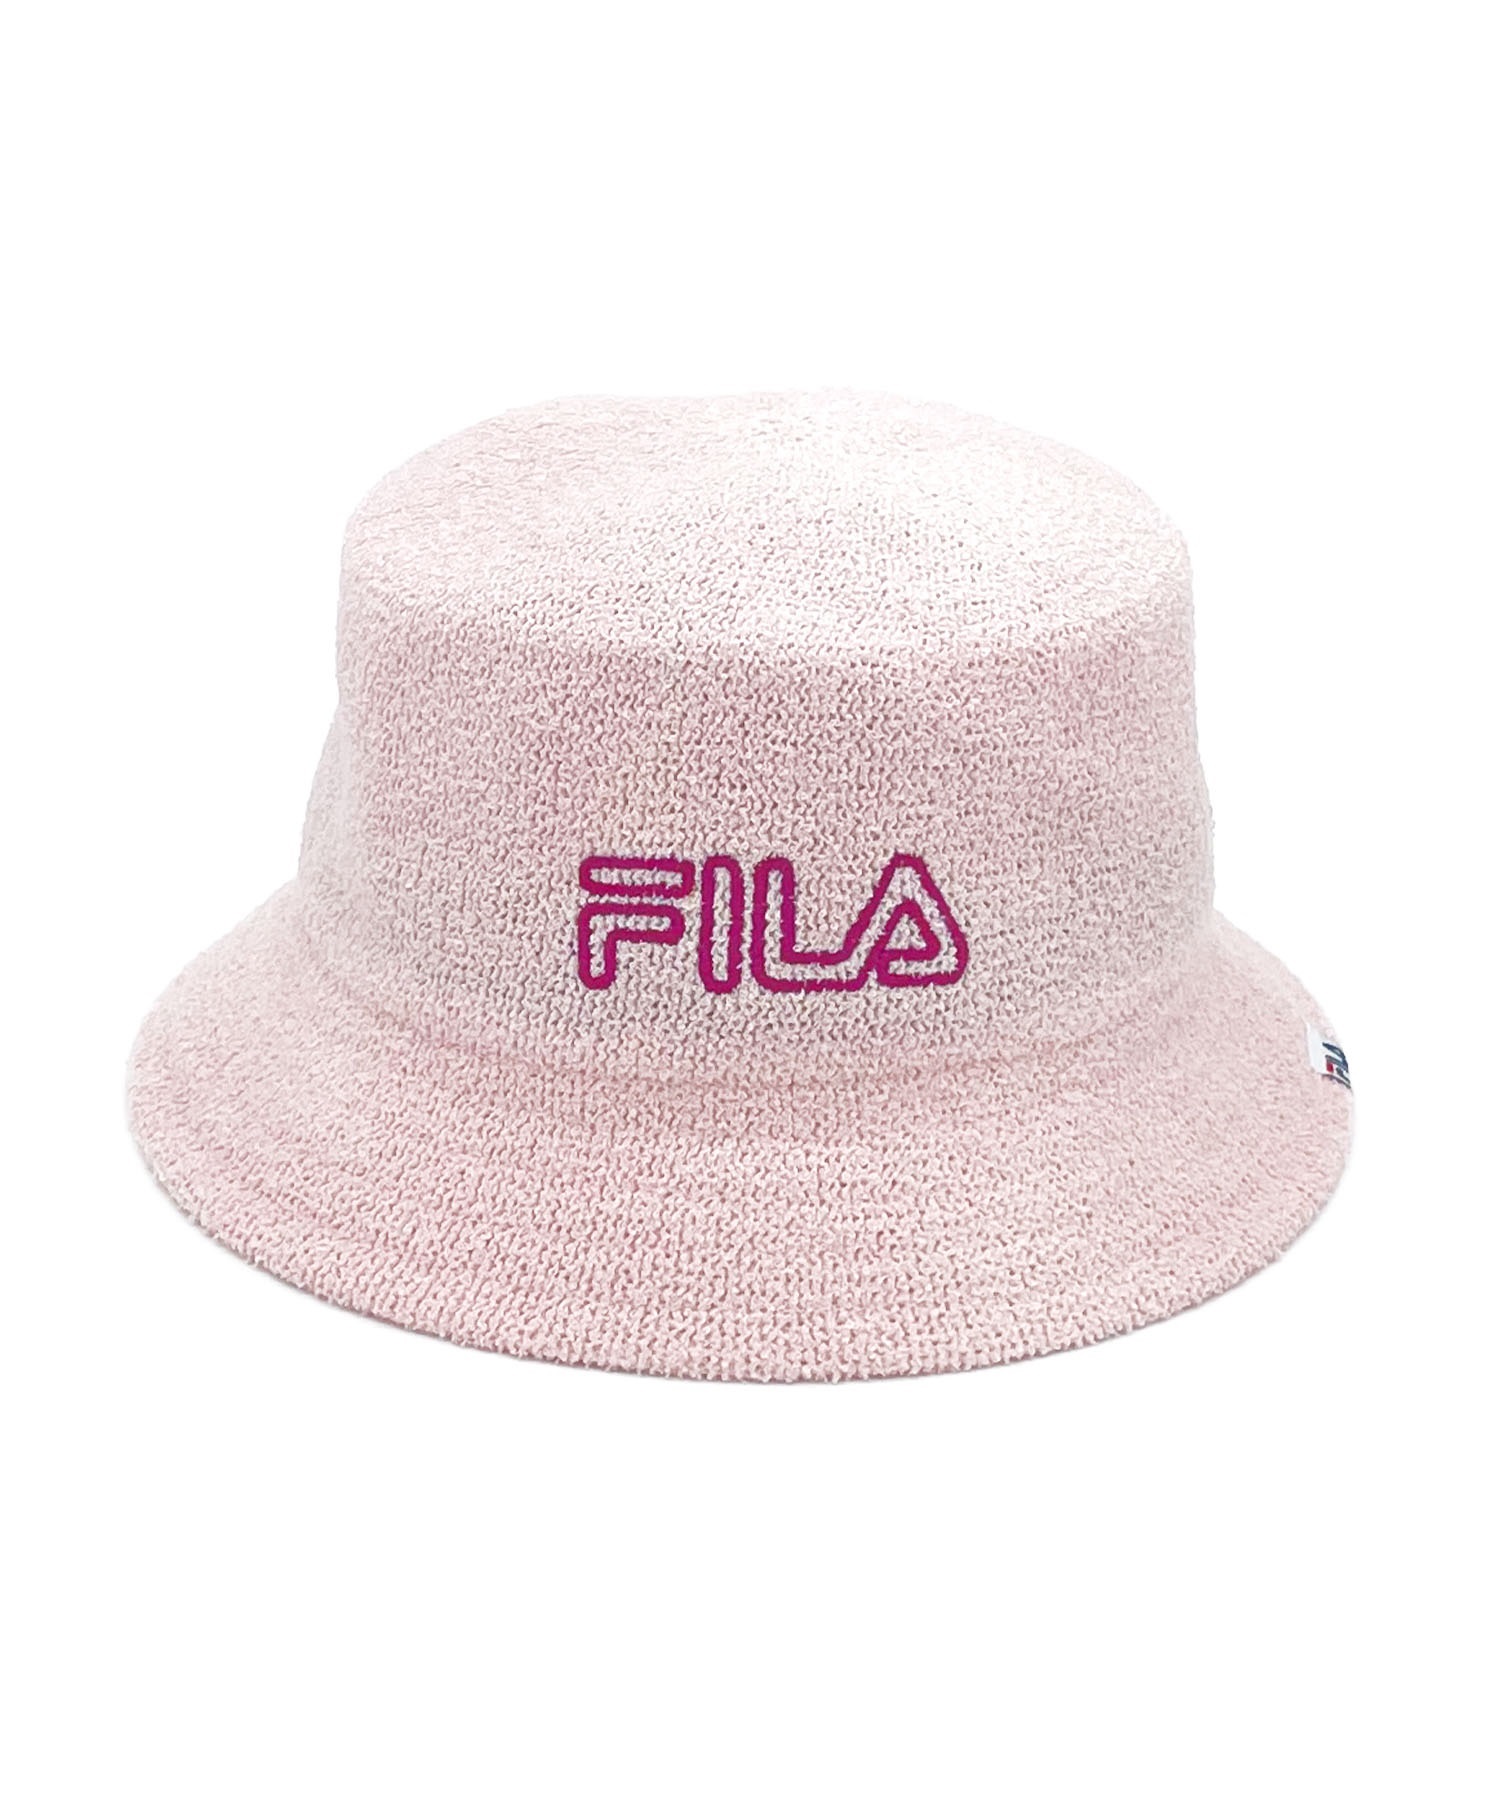 FILA フィラ HAT FLM THERMO HAT キッズ ハット 241013006(15PNK-56cm)